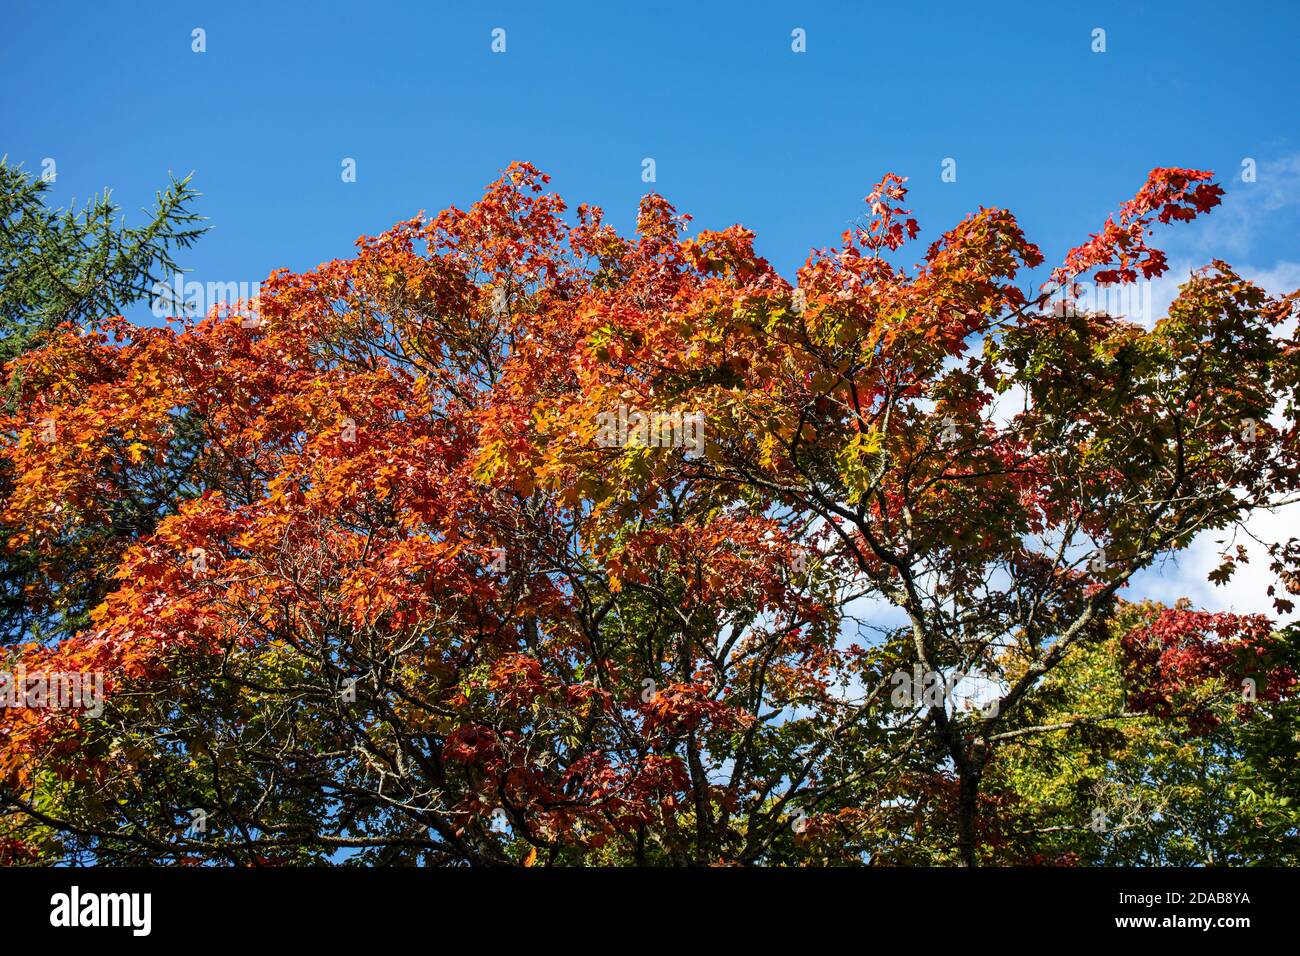 Early autumn colors against blue sky Stock Photo